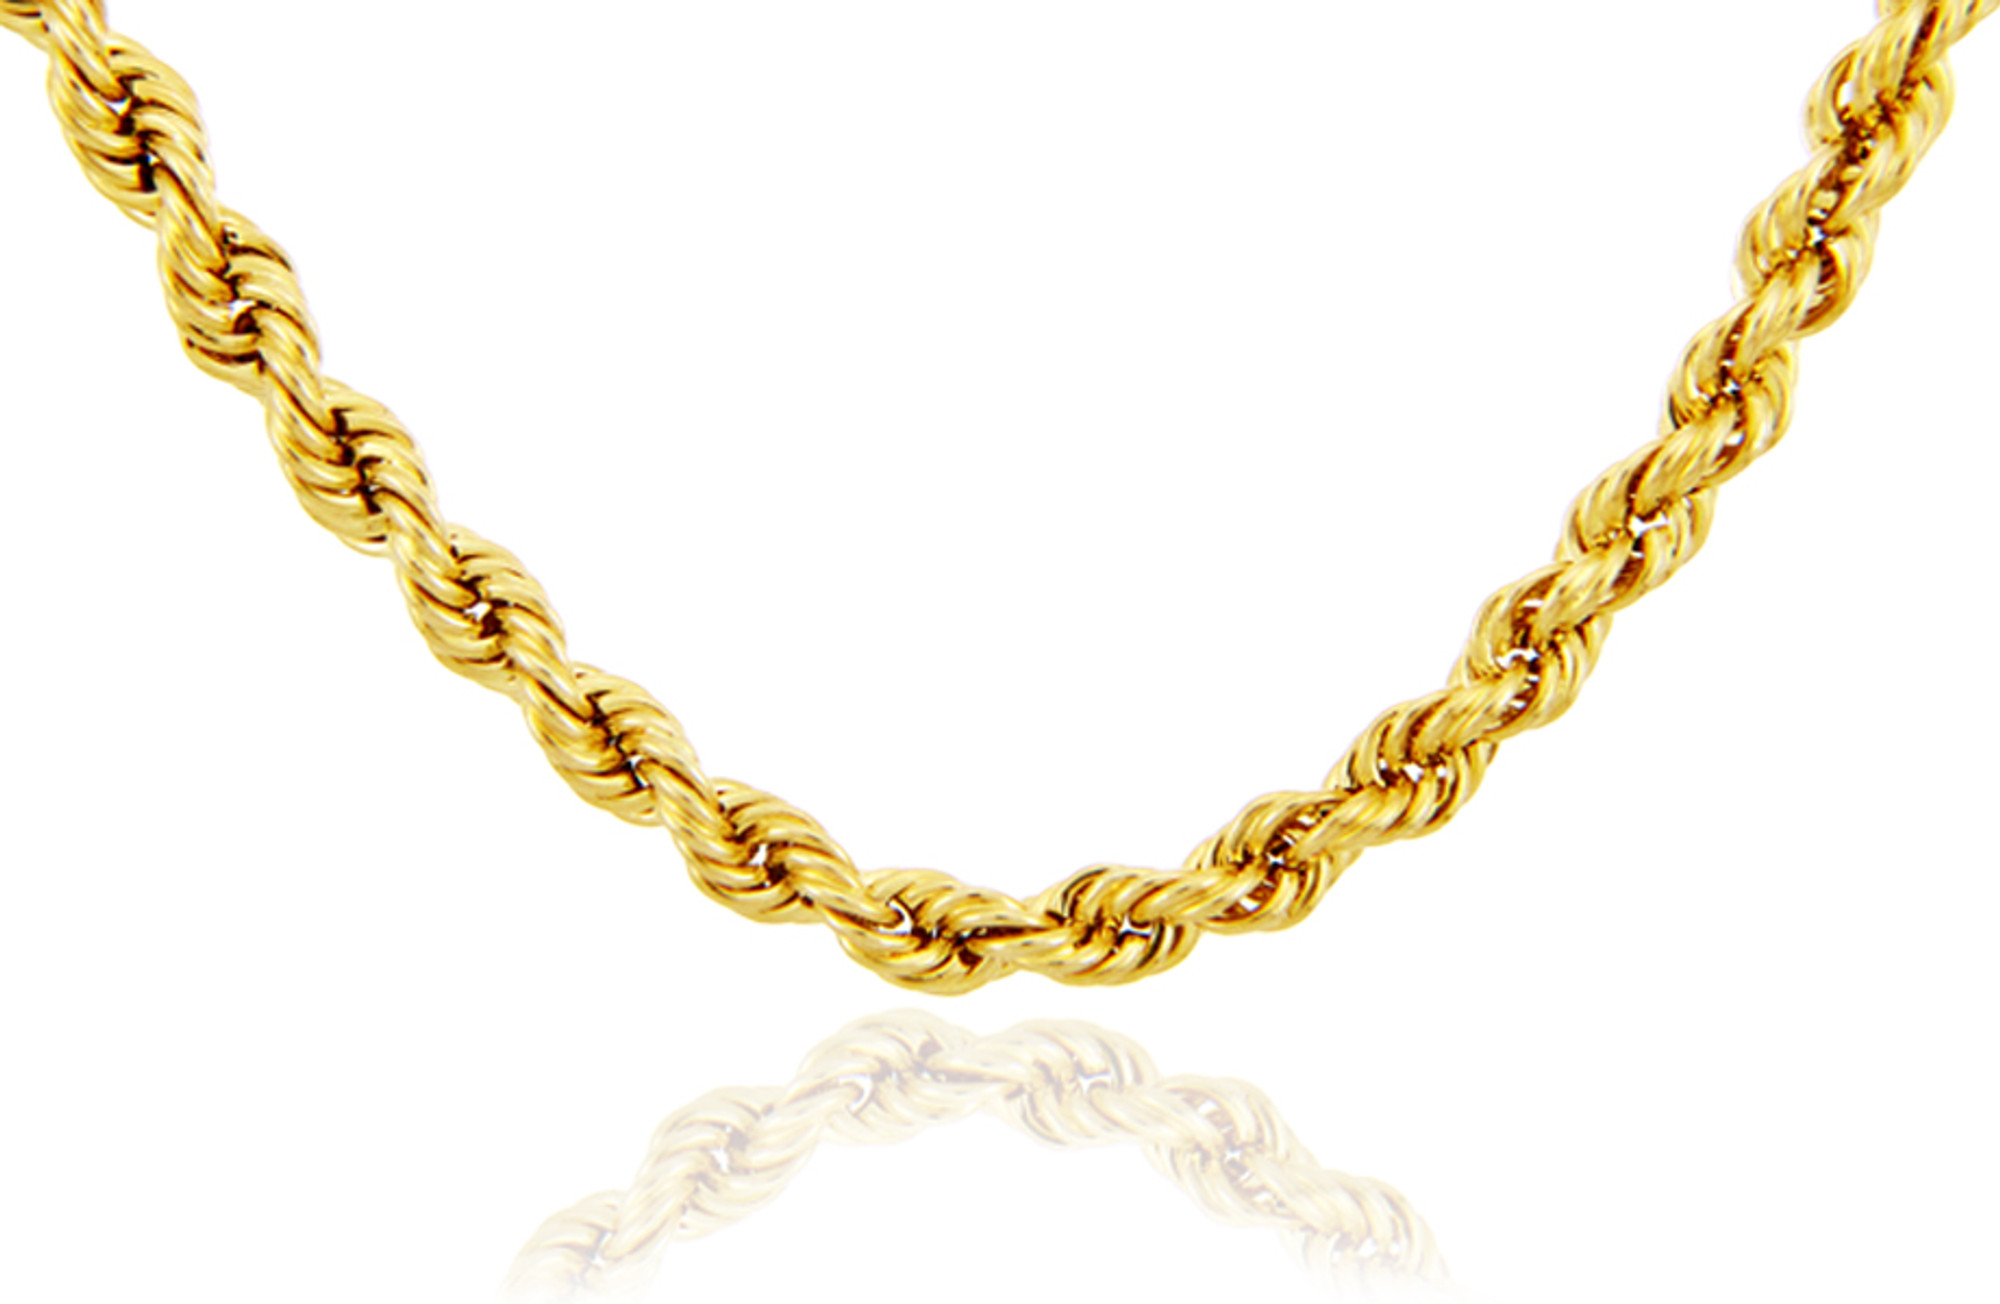 10k Yellow Gold 2mm Ultralight Rope Chain Link Necklace